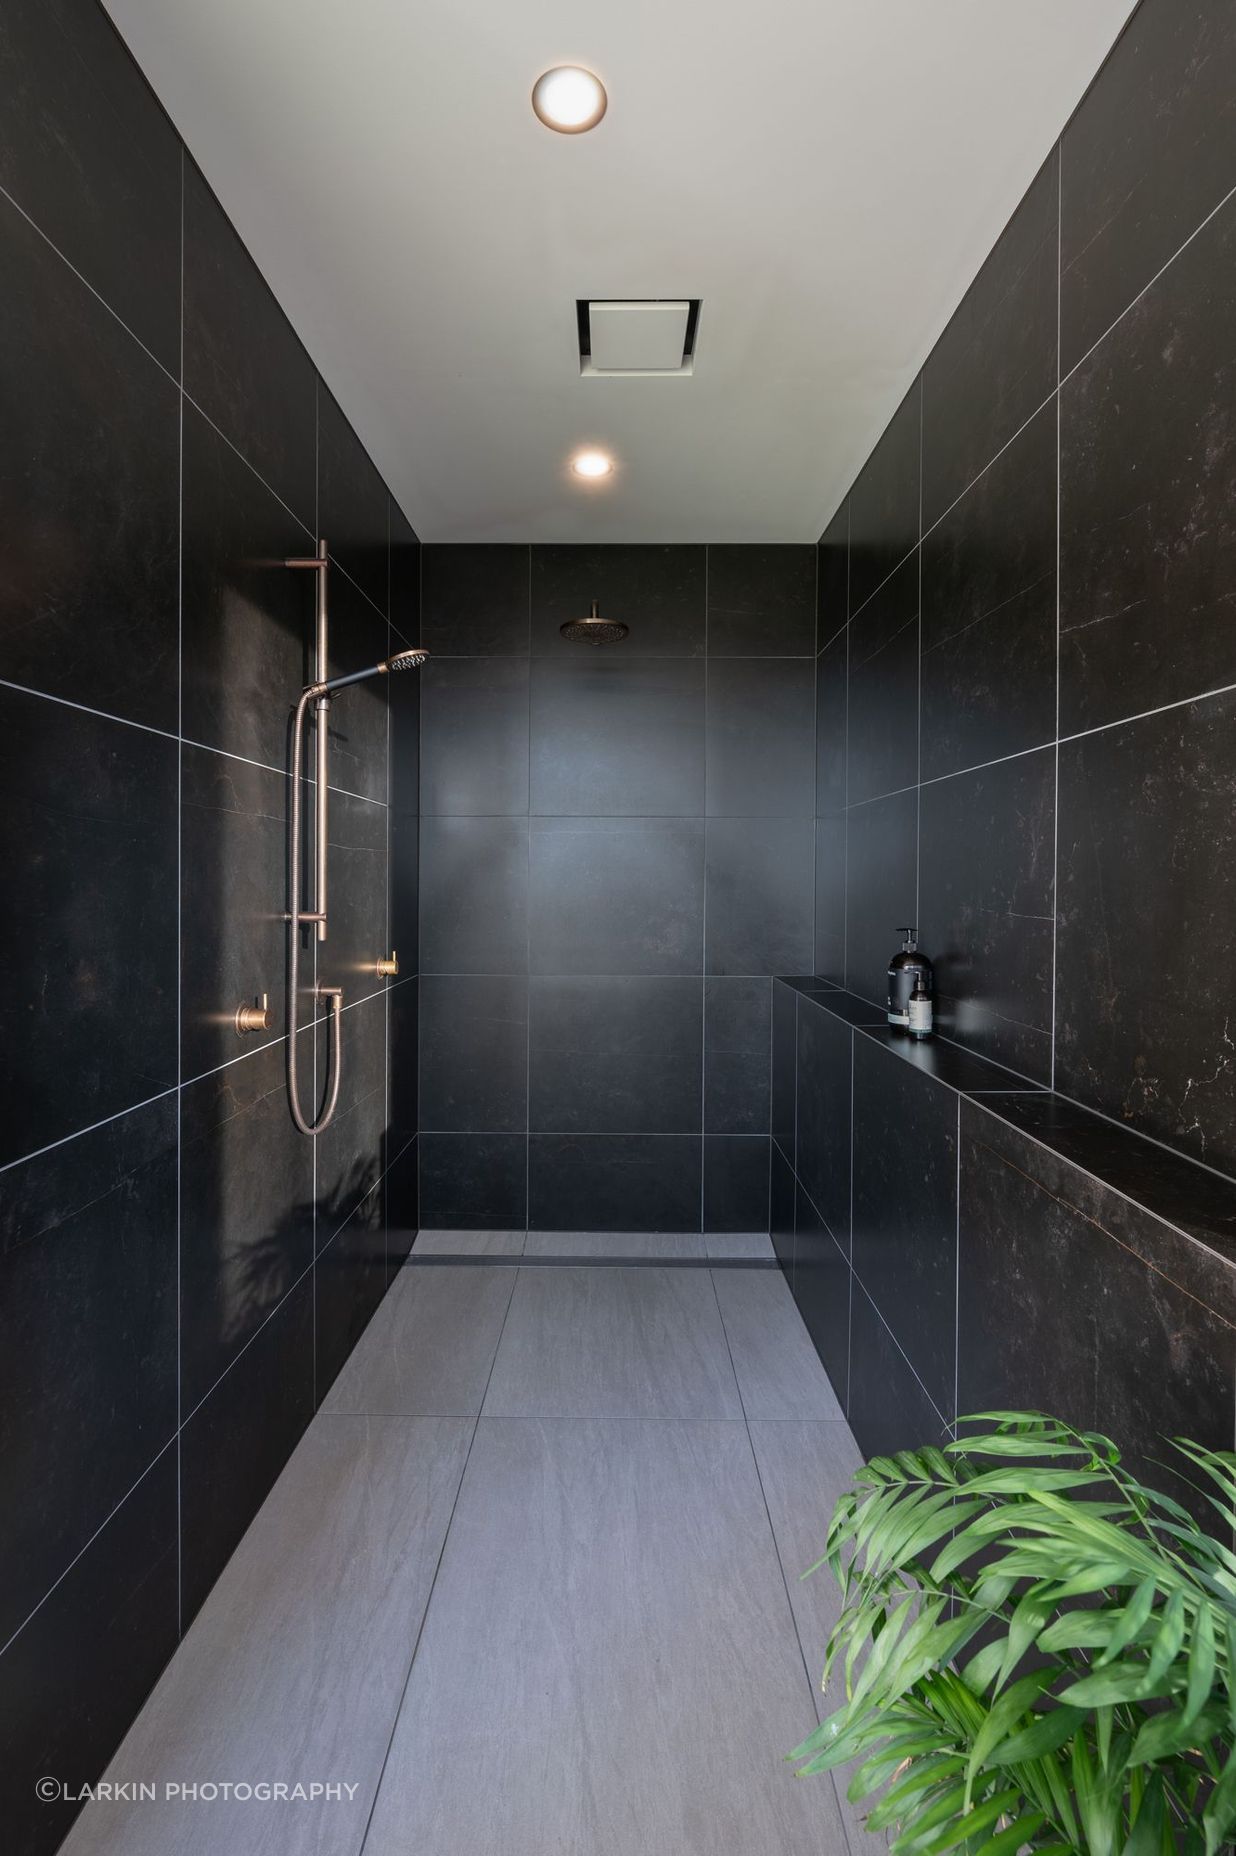 The family bathroom's shower is recessed into a private nook.